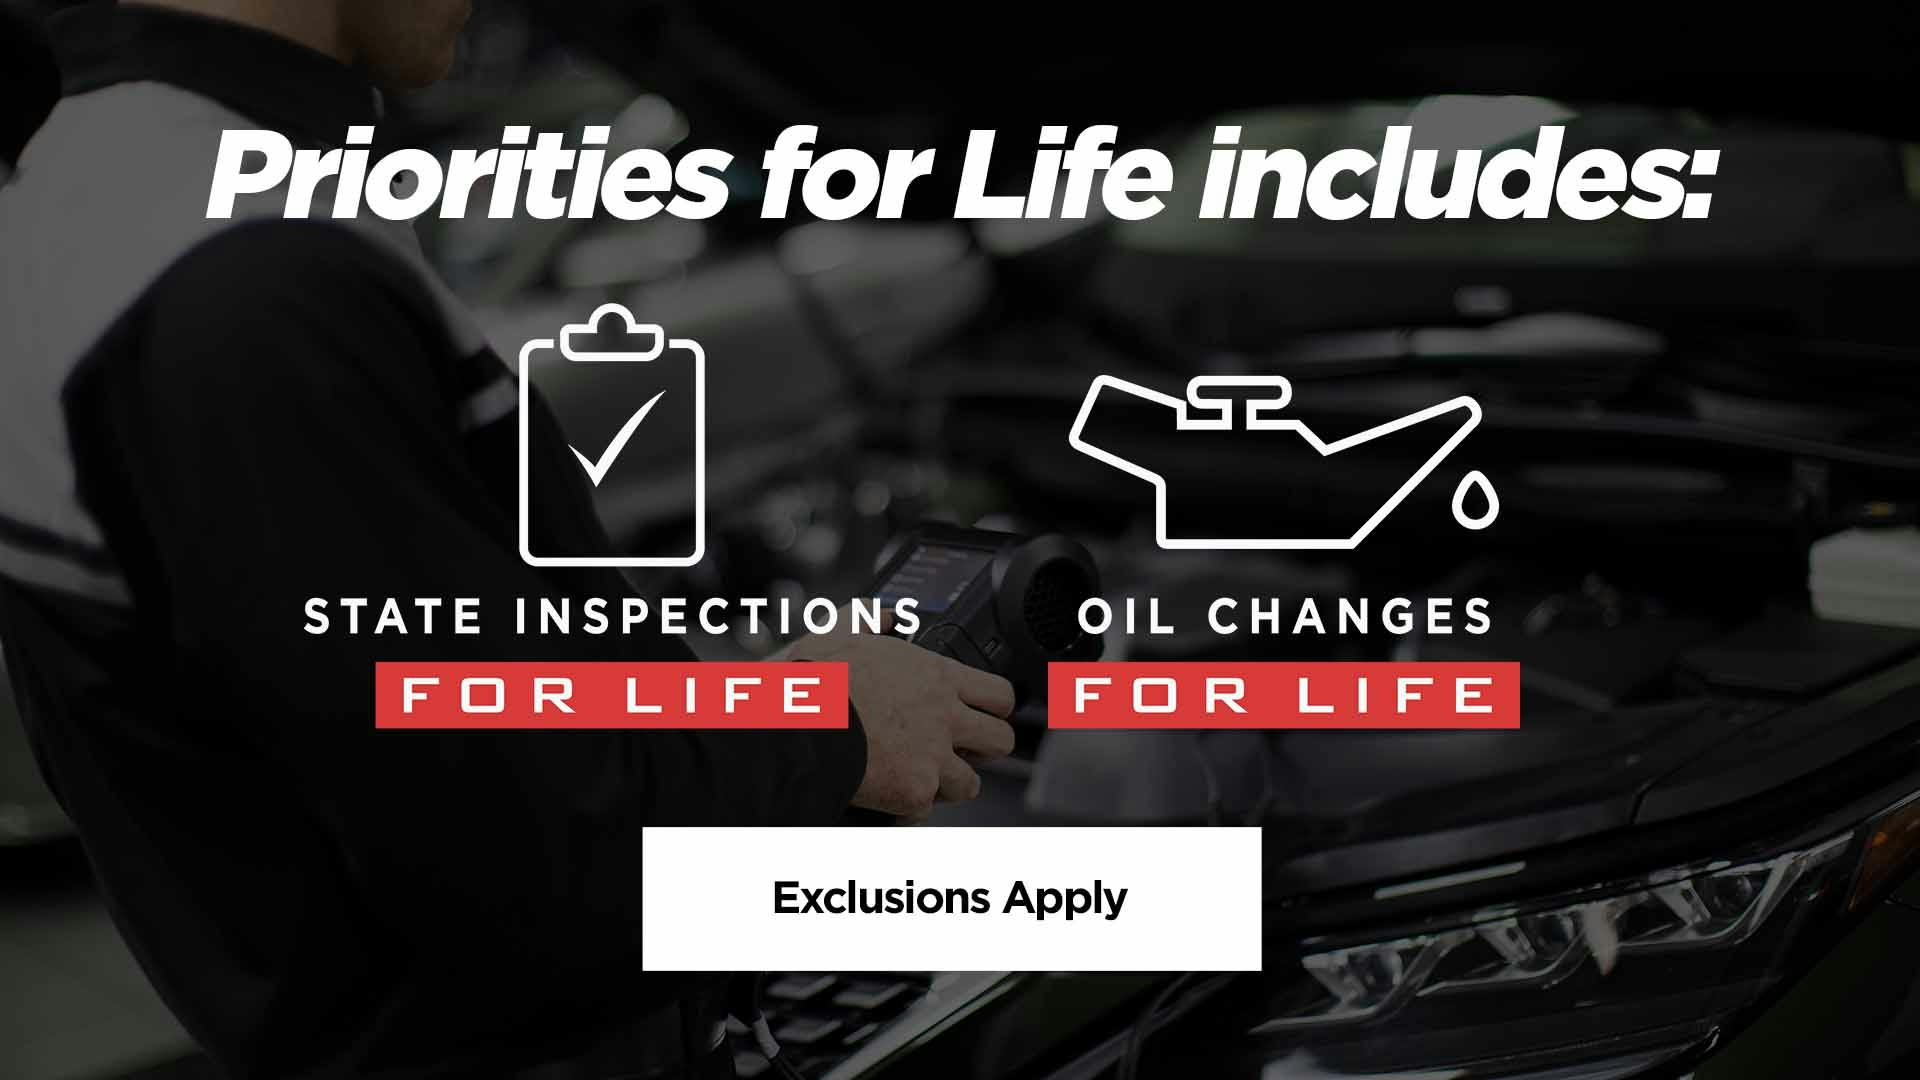 Priority Toyota Springfield Priorities For Life includes State Inspections and Oil Changes